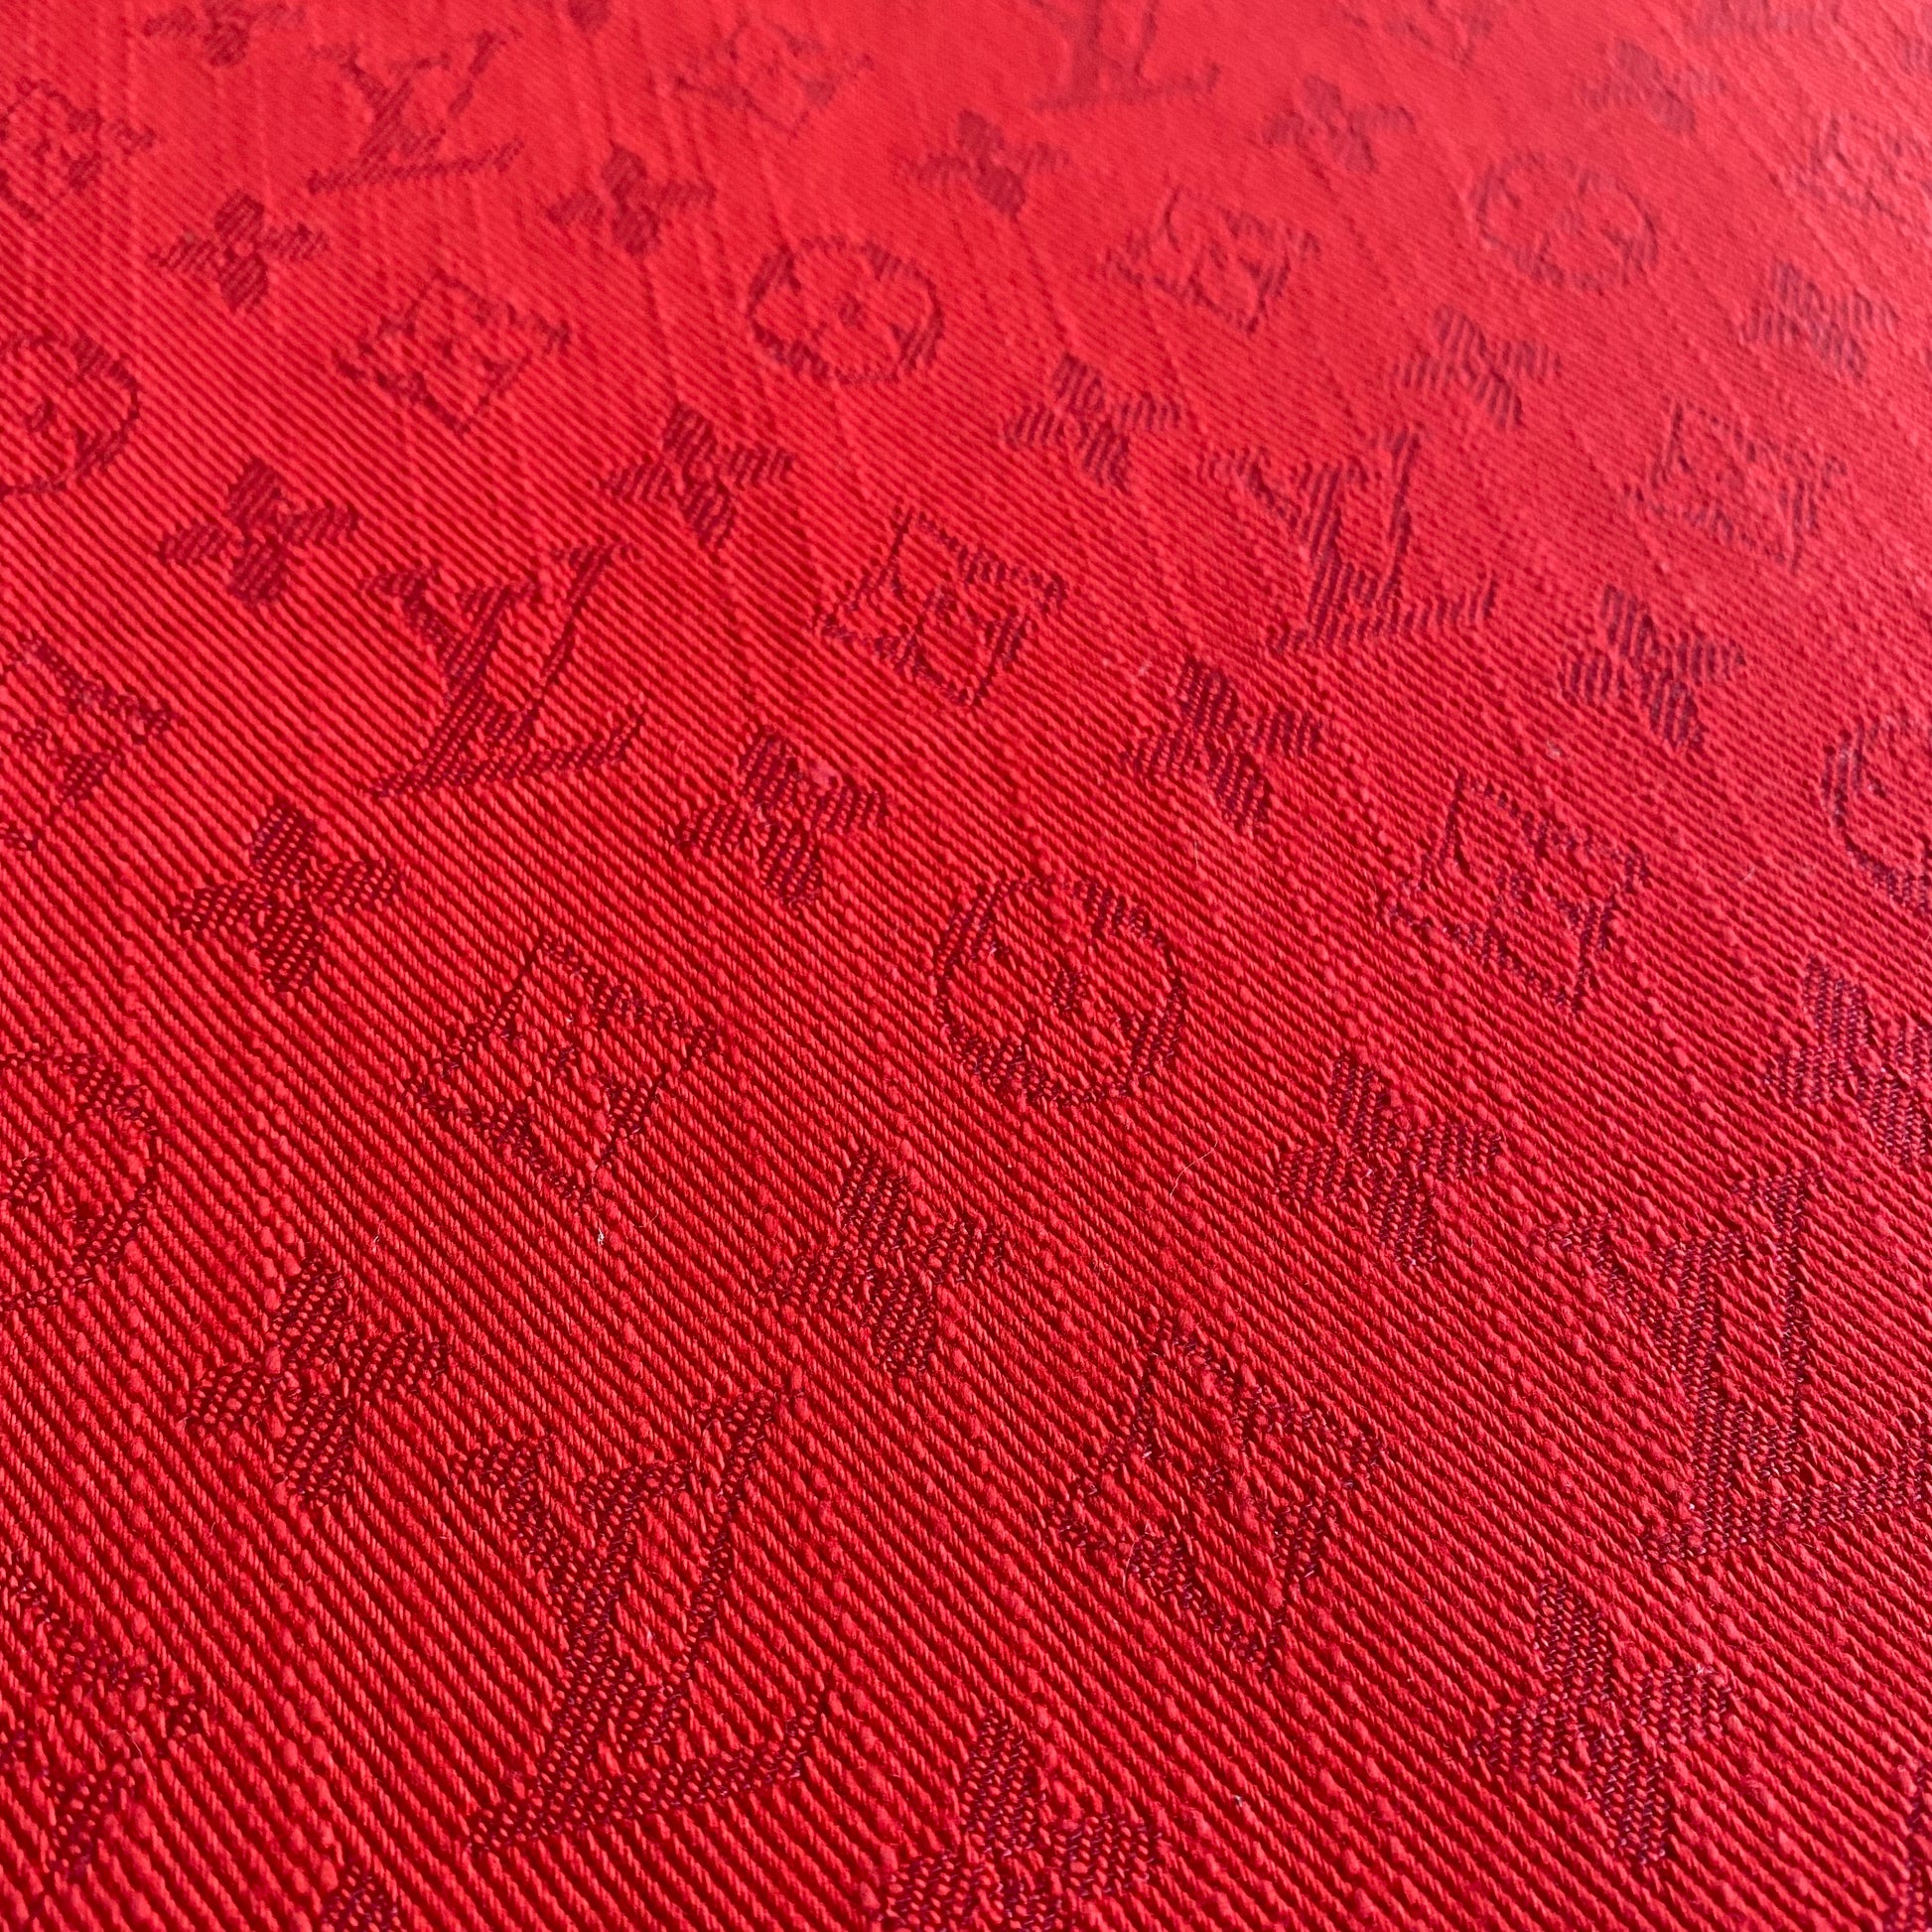 louis vuitton print material fabric by the yard